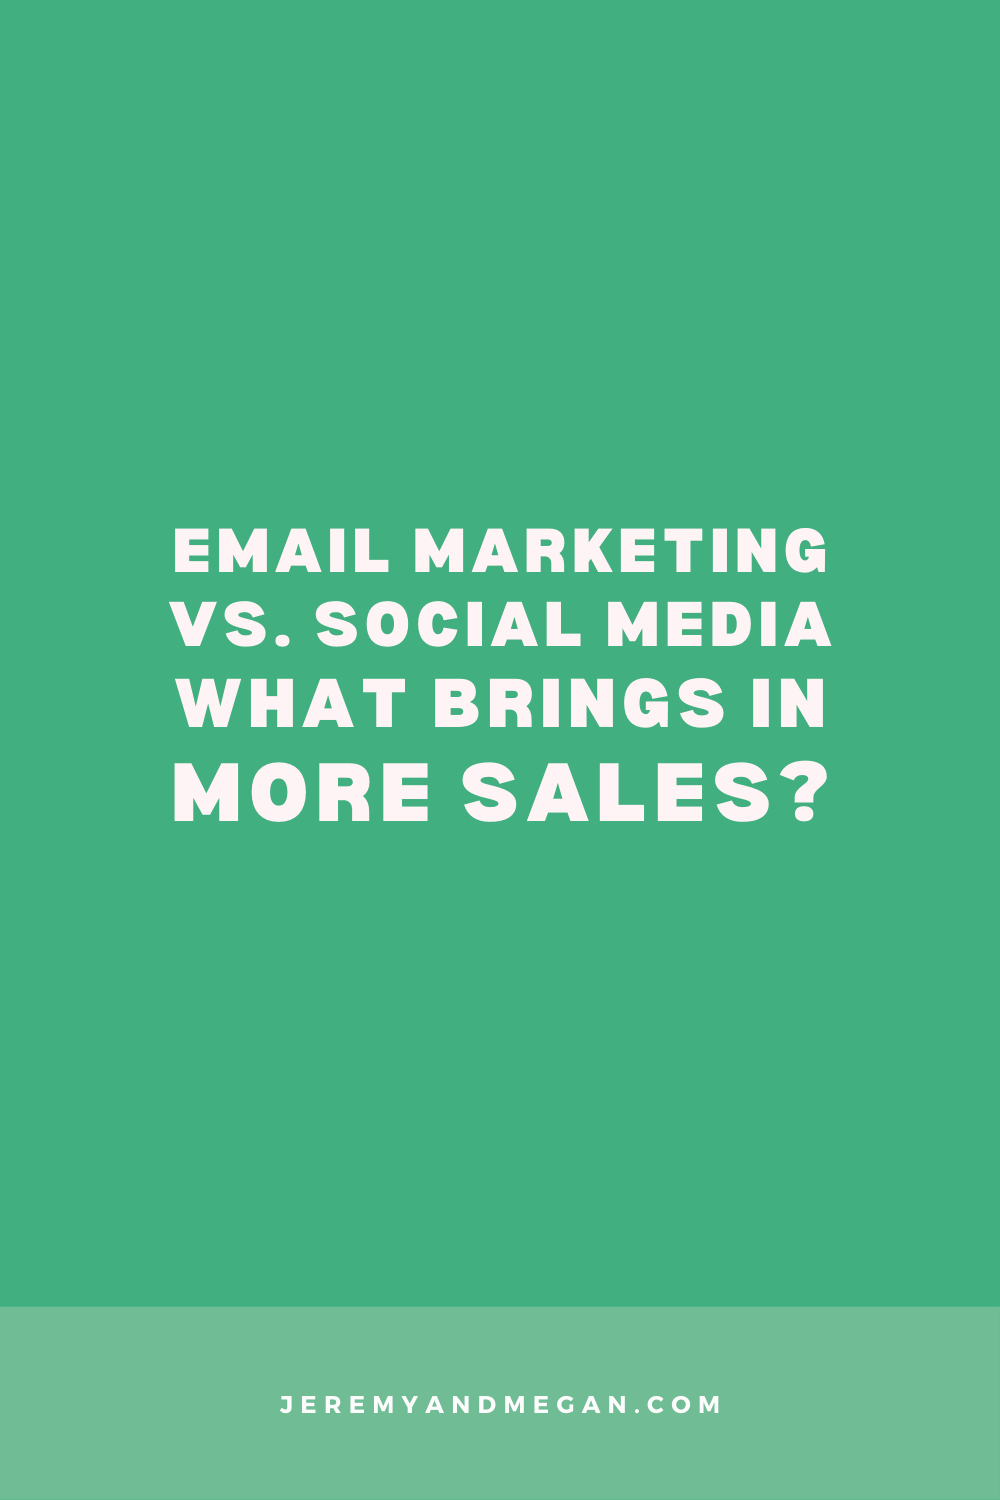 Email Marketing vs. Social Media: What Brings in More Sales? Megan Martin breaks down the history of emails and social media for sales